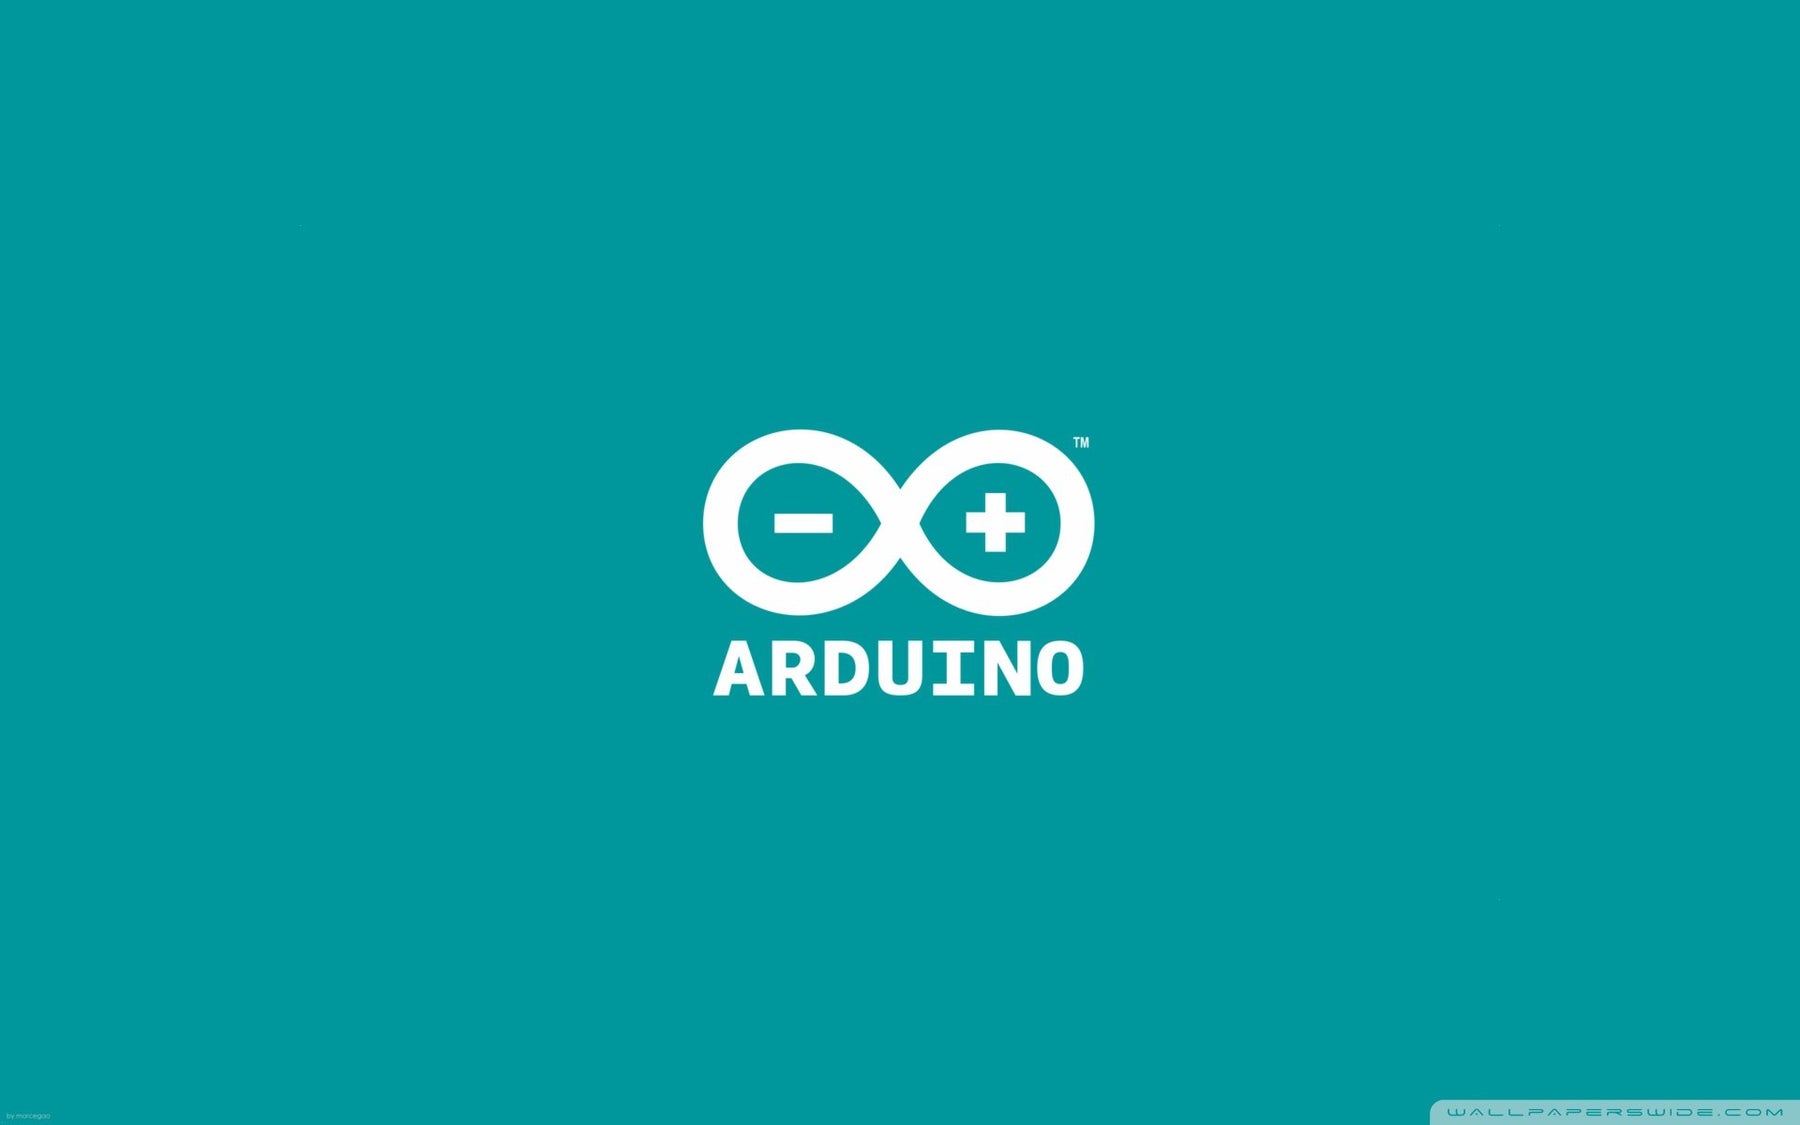 How to install libraries when using the Arduino IDE